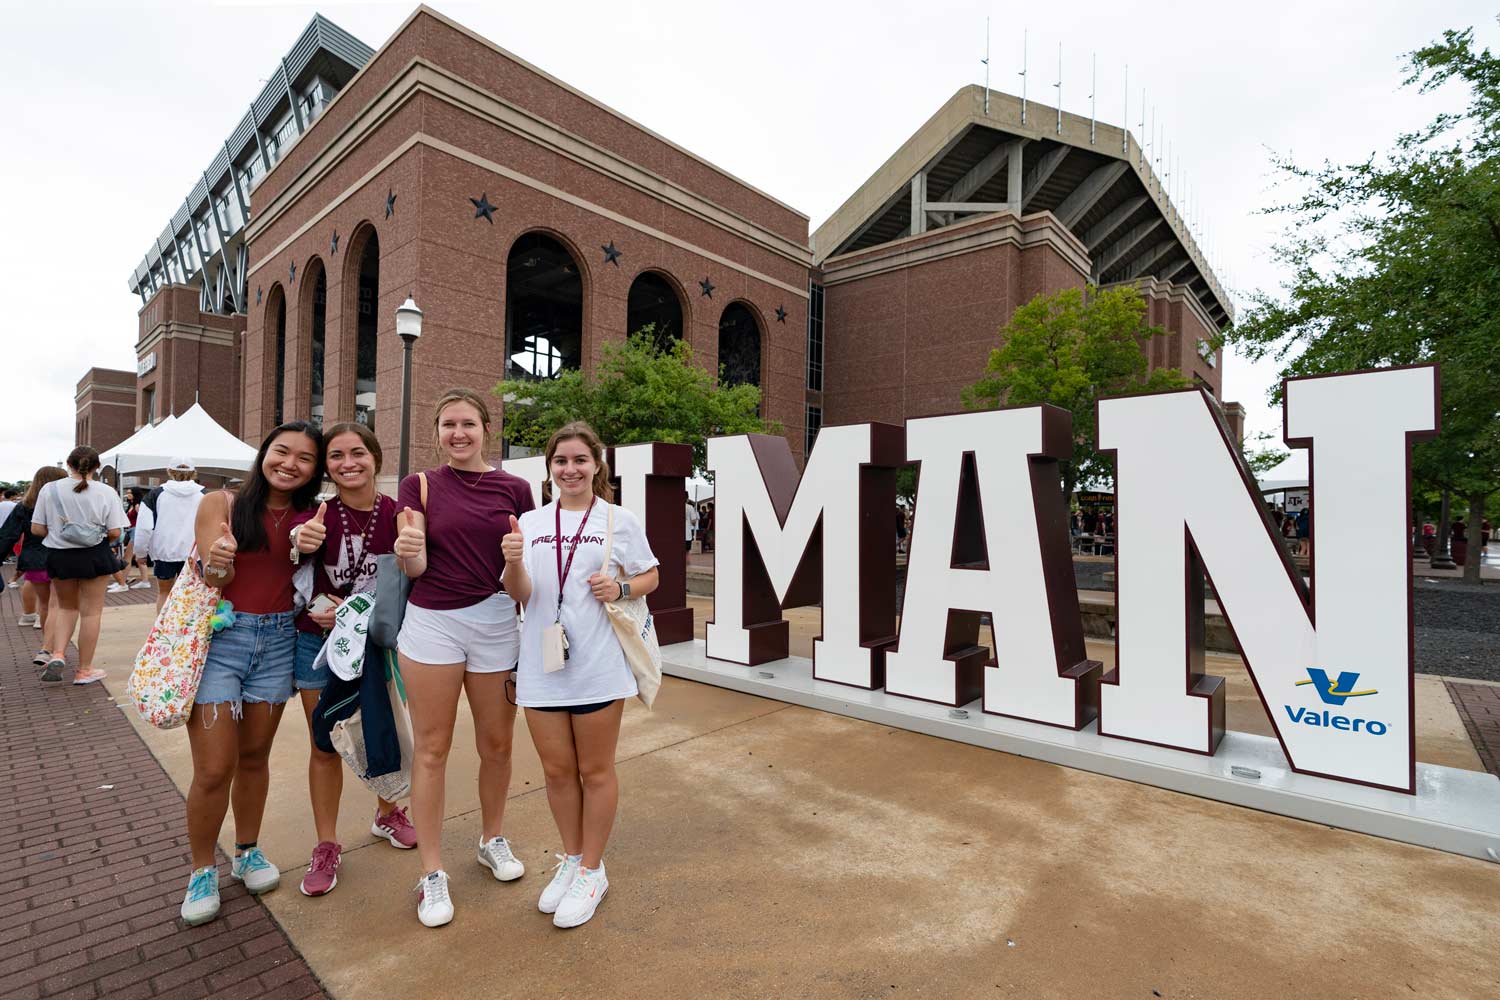 Aggie Students posing in front of the 12th Man sign at fish fest